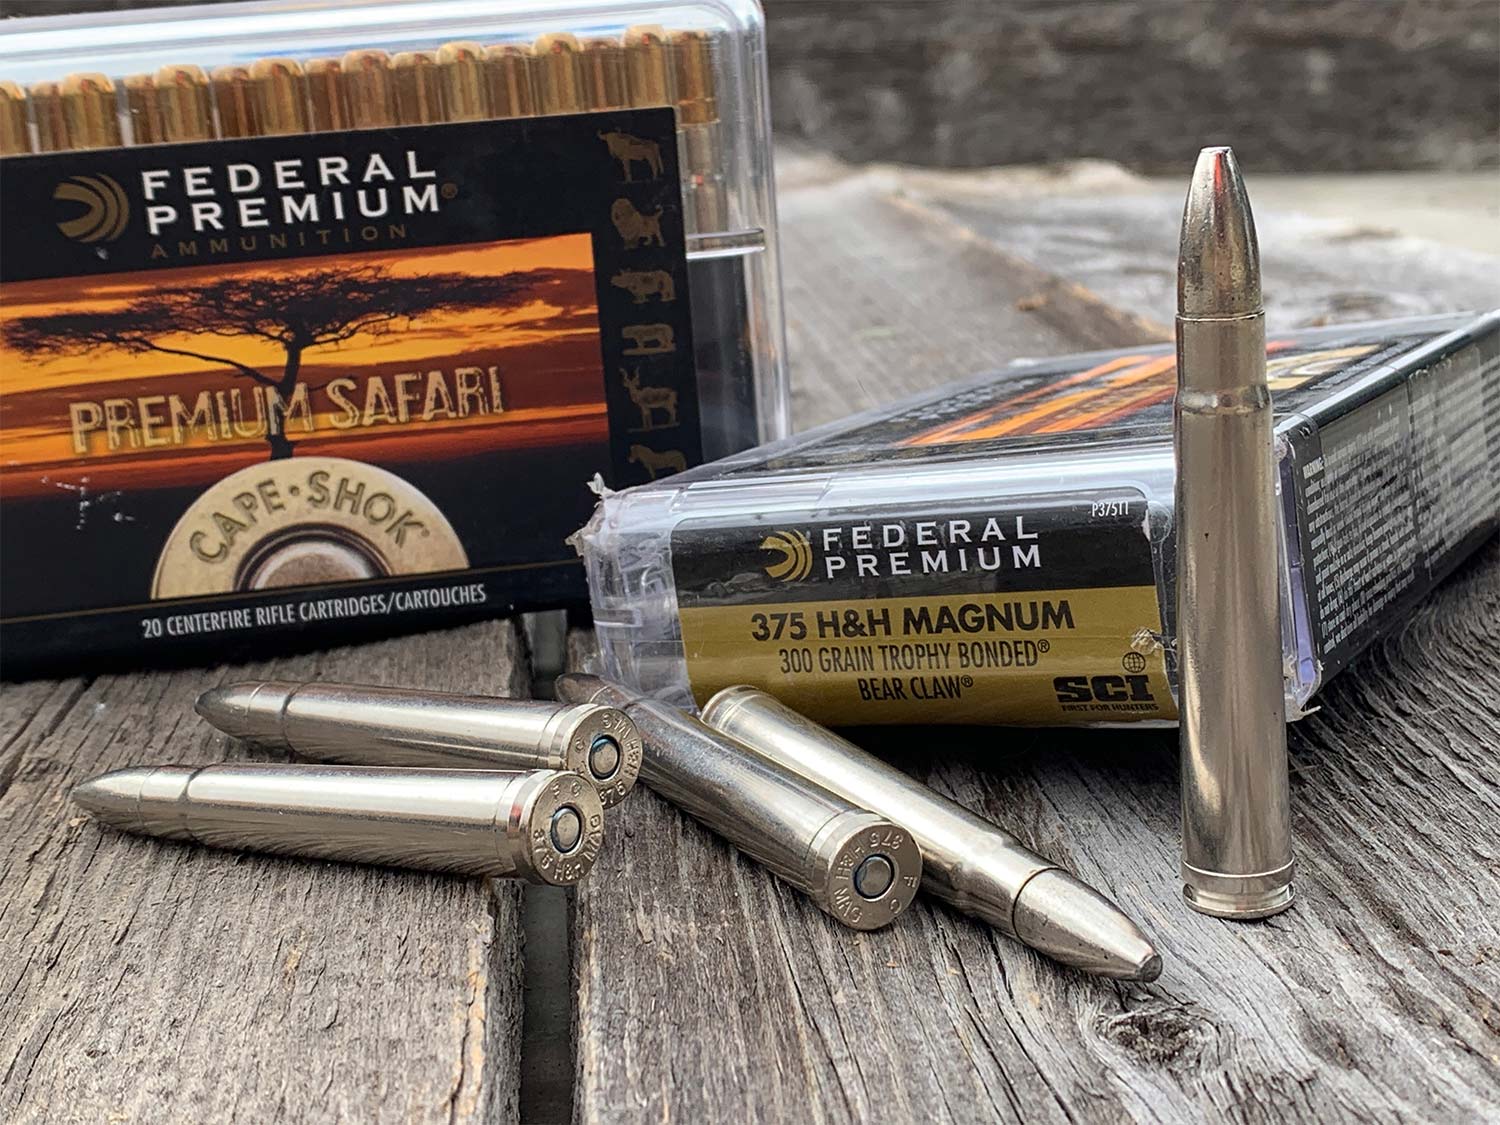 Several magnum hunting cartridges on a wooden table.